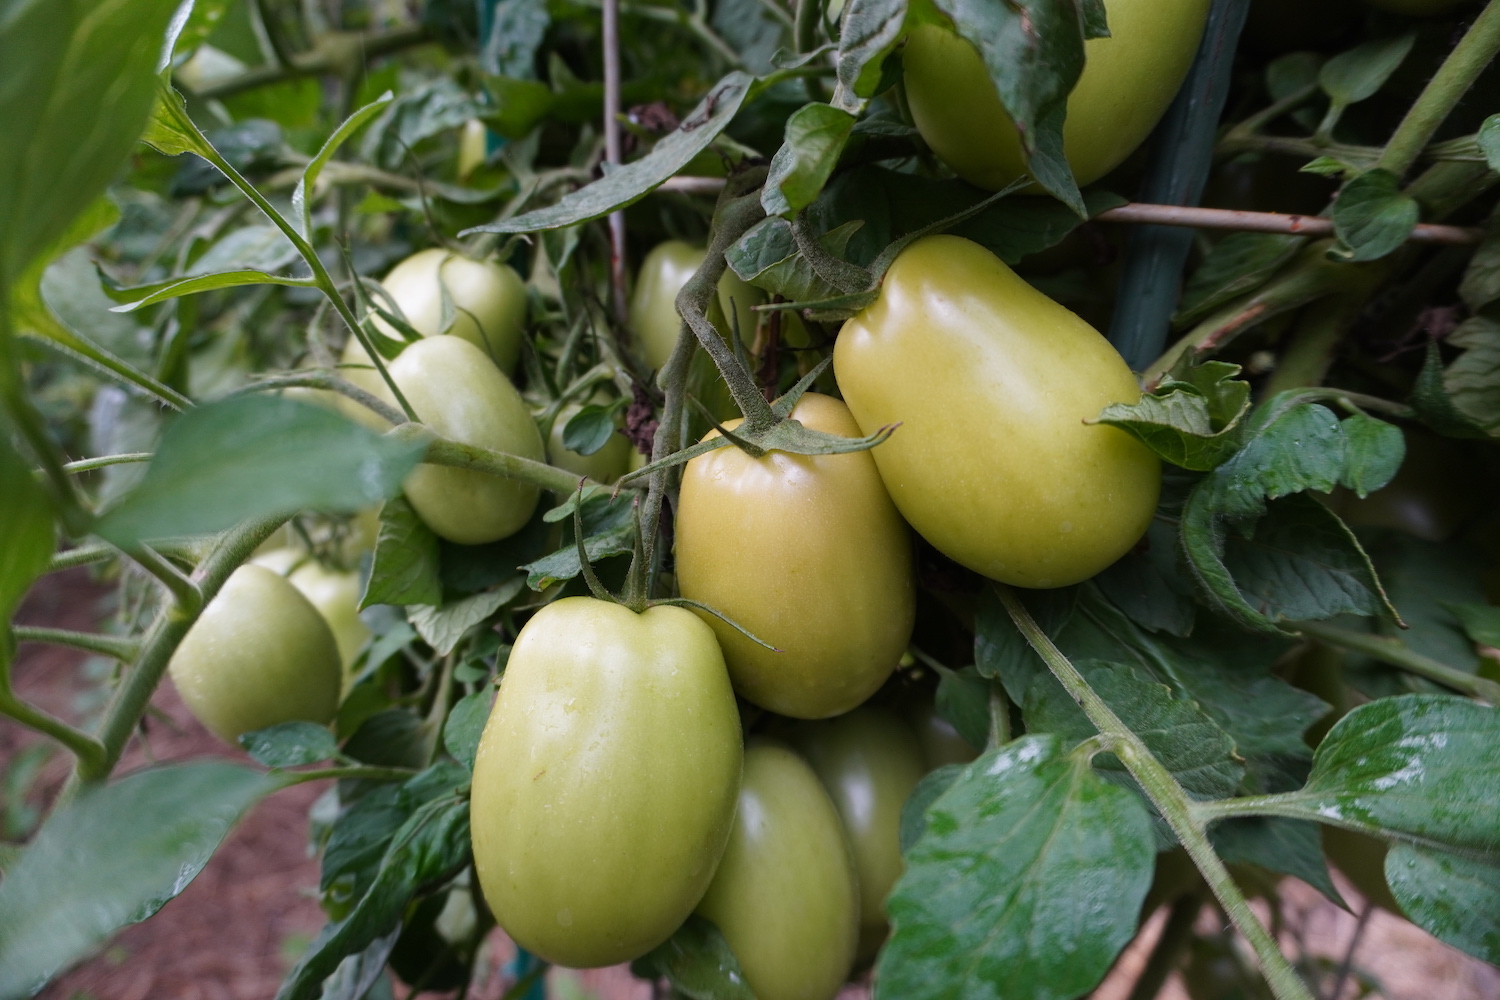 A close up view of large tomatoes that are just starting to turn color